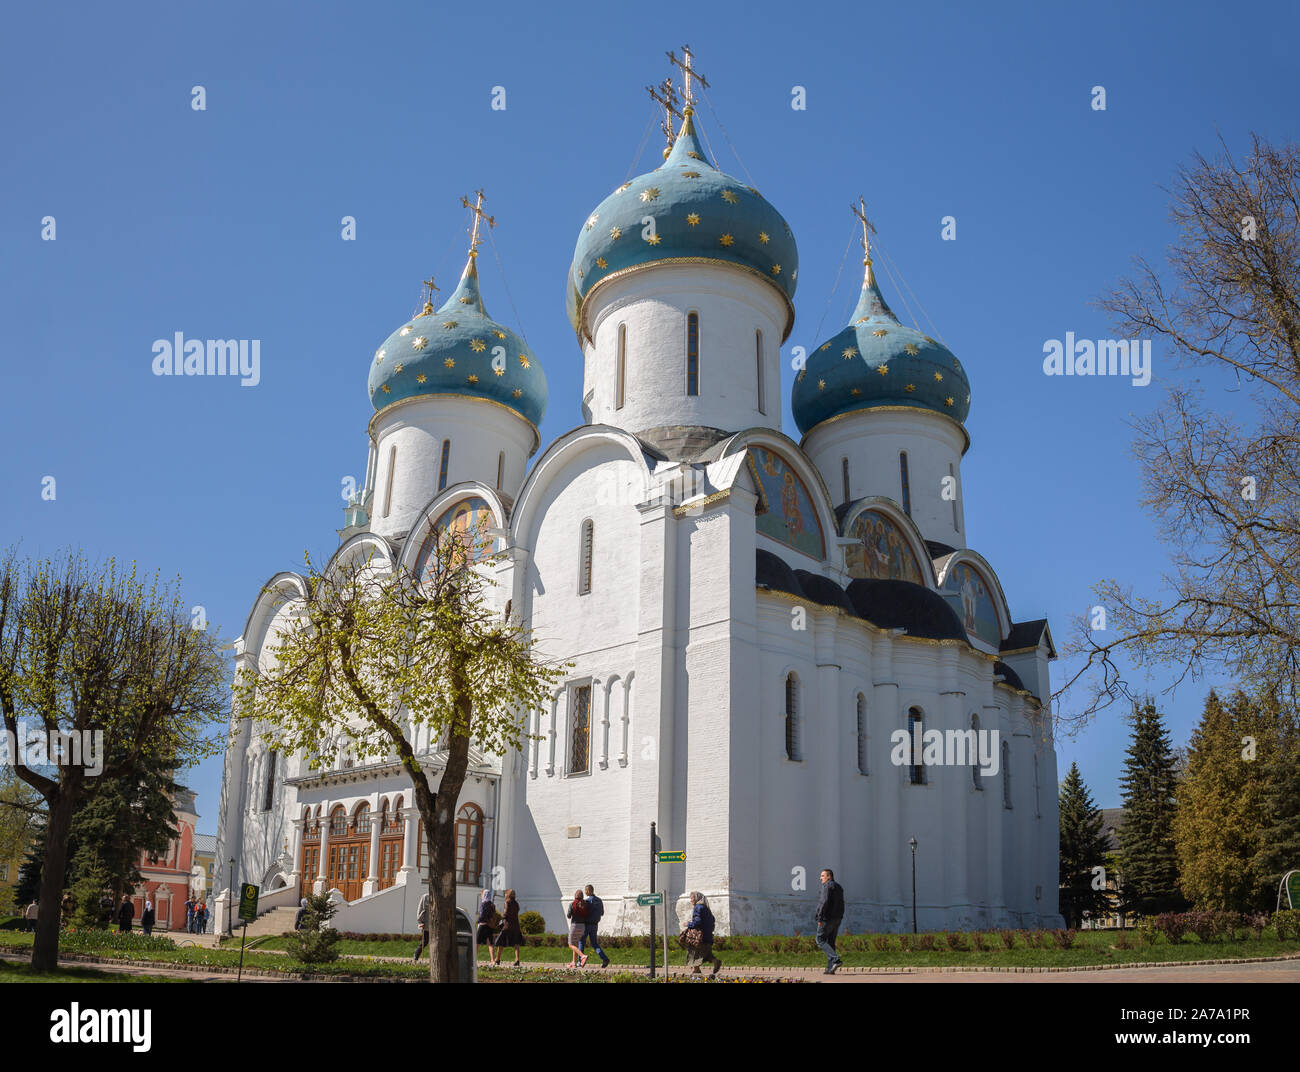 SERGIEV POSAD, MOSCOW REGION, RUSSIA - MAY 10, 2018: Assumption (Uspensky) Cathedral in the Trinity Lavra of St. Sergius Stock Photo